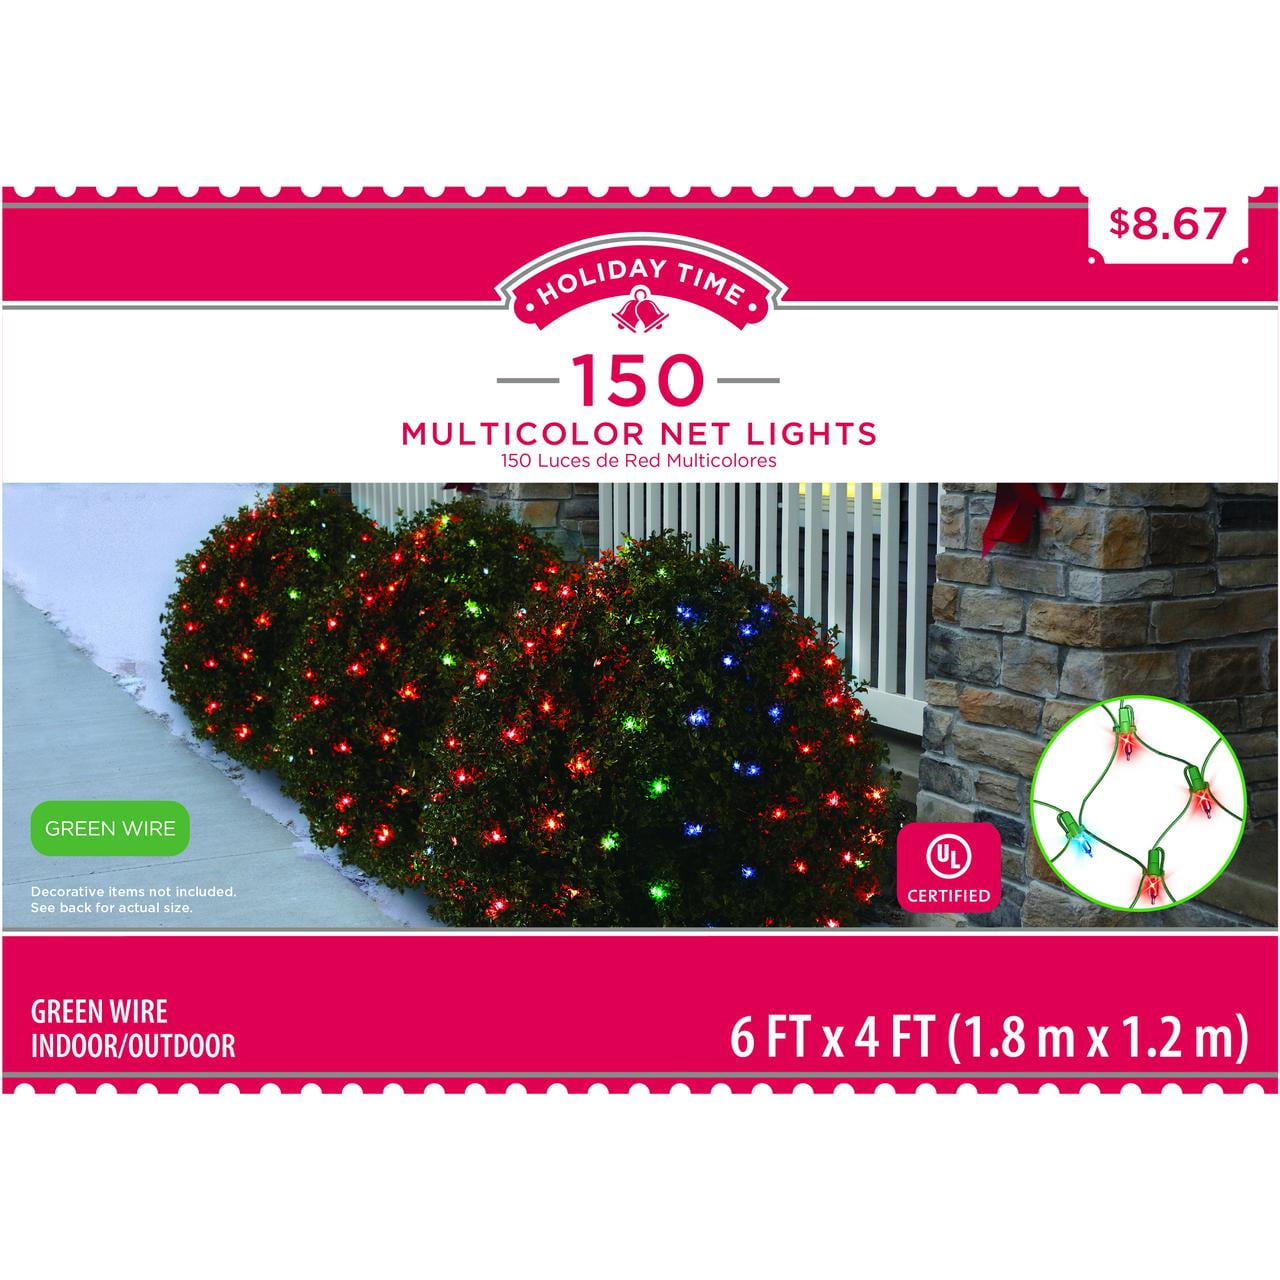 Lot of 2--Holiday Time 150 Multi-Color Net Lights-New-Green Wire-FREE SHIPPING 